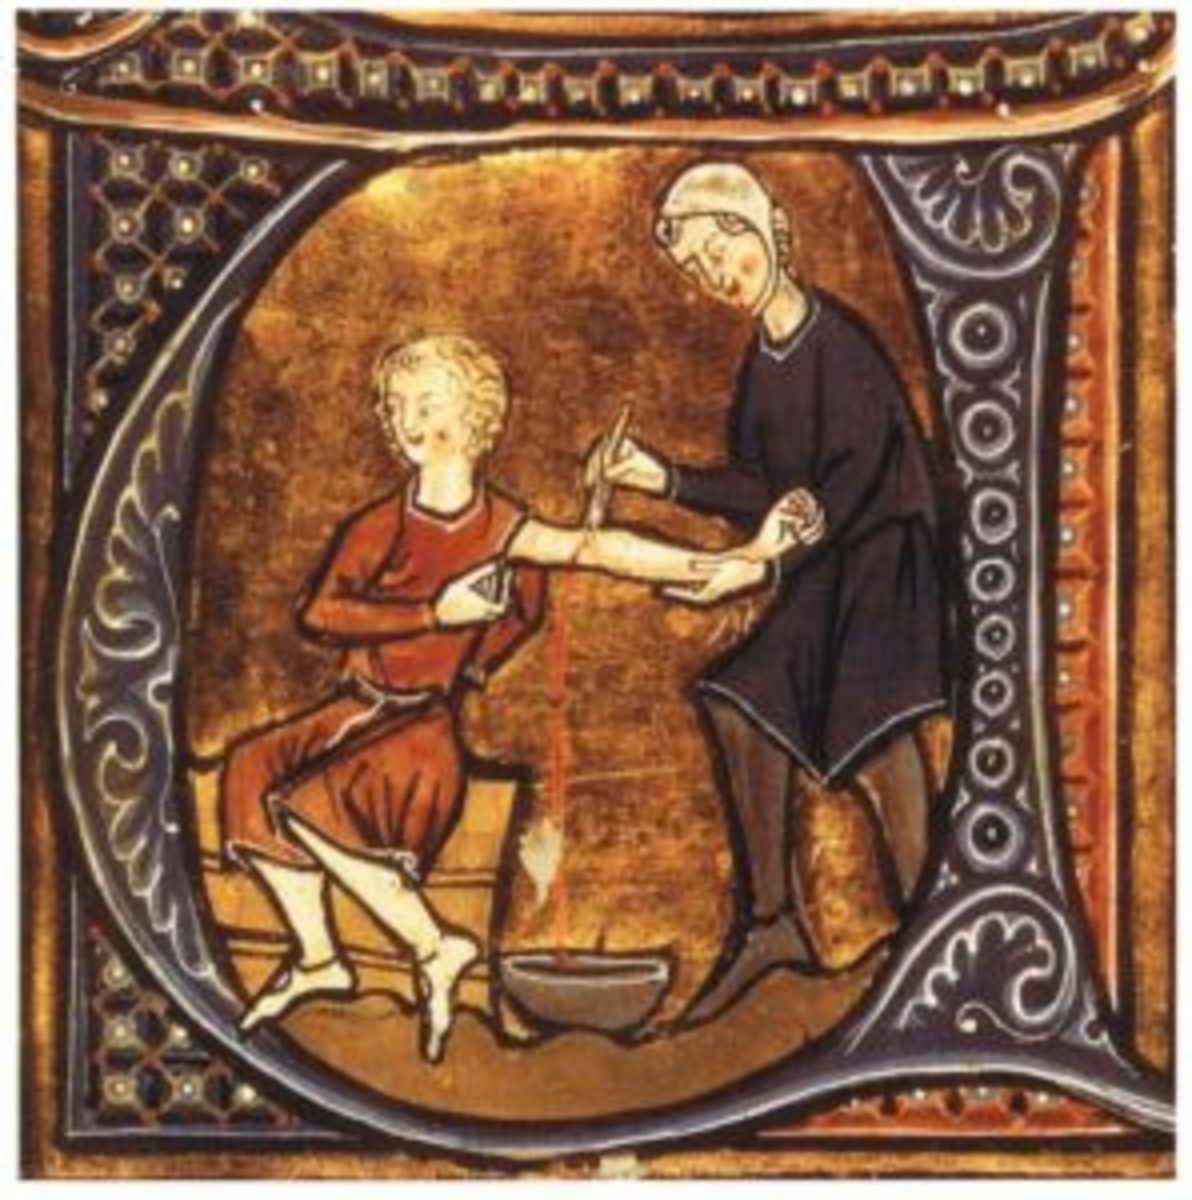 Bloodletting: The proposed cure for almost every medieval malady.